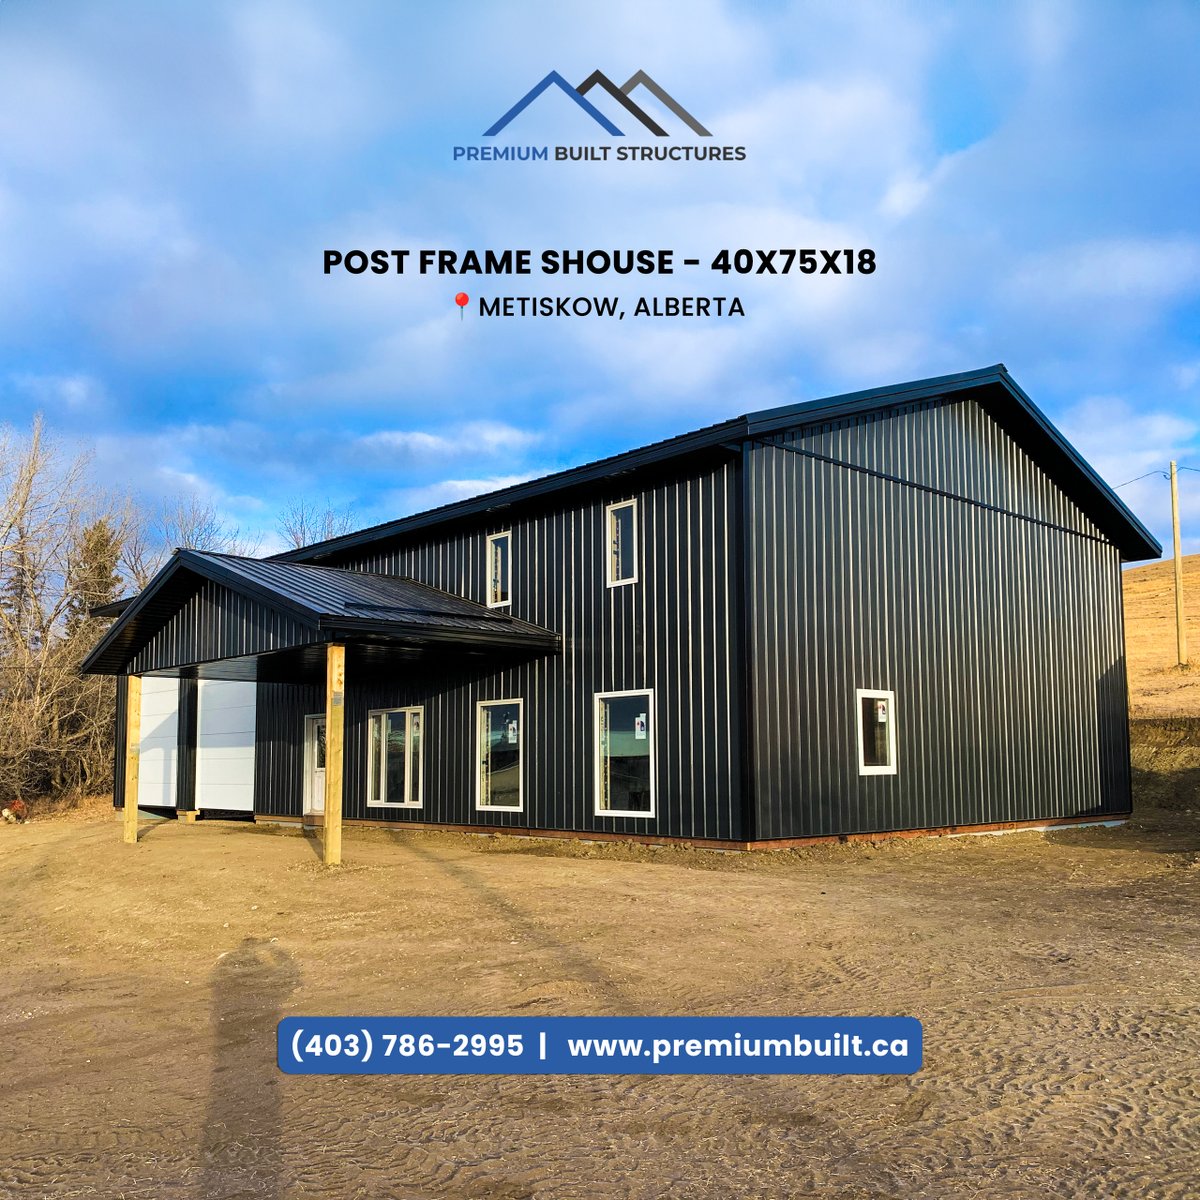 Take a look at this 40x75 black shouse we built in Metiskow, Alberta!  It's got a full interior build, 18' ceilings, and overhead doors. Perfect for living and working all in one place.

#ShouseLiving #PostFrameBuilding #MetiskowAlberta #PremiumBuiltStructures